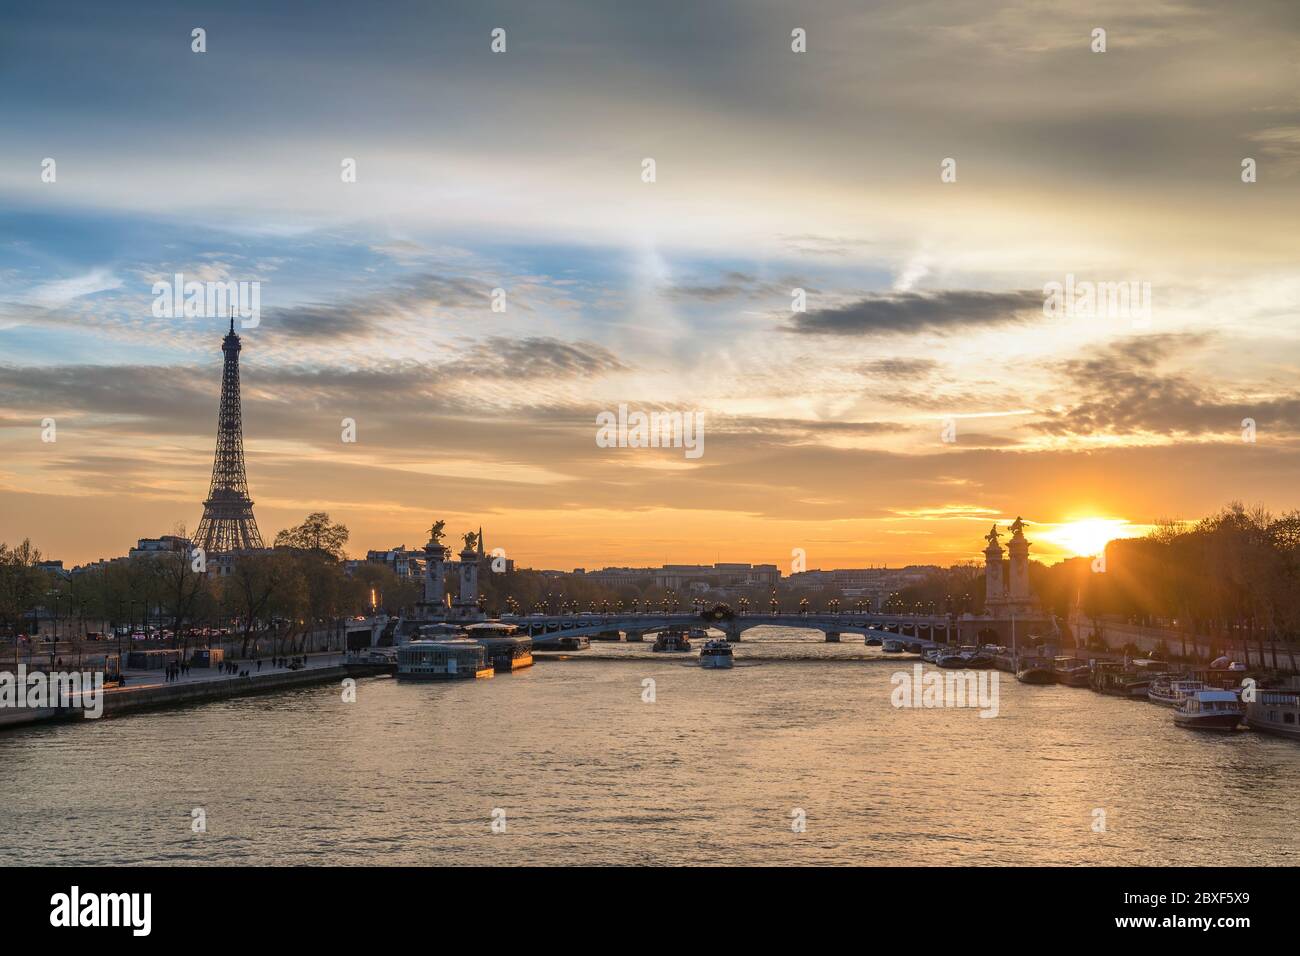 Paris France sunset city skyline at Seine River with Pont Alexandre III bridge and Eiffel Tower Stock Photo